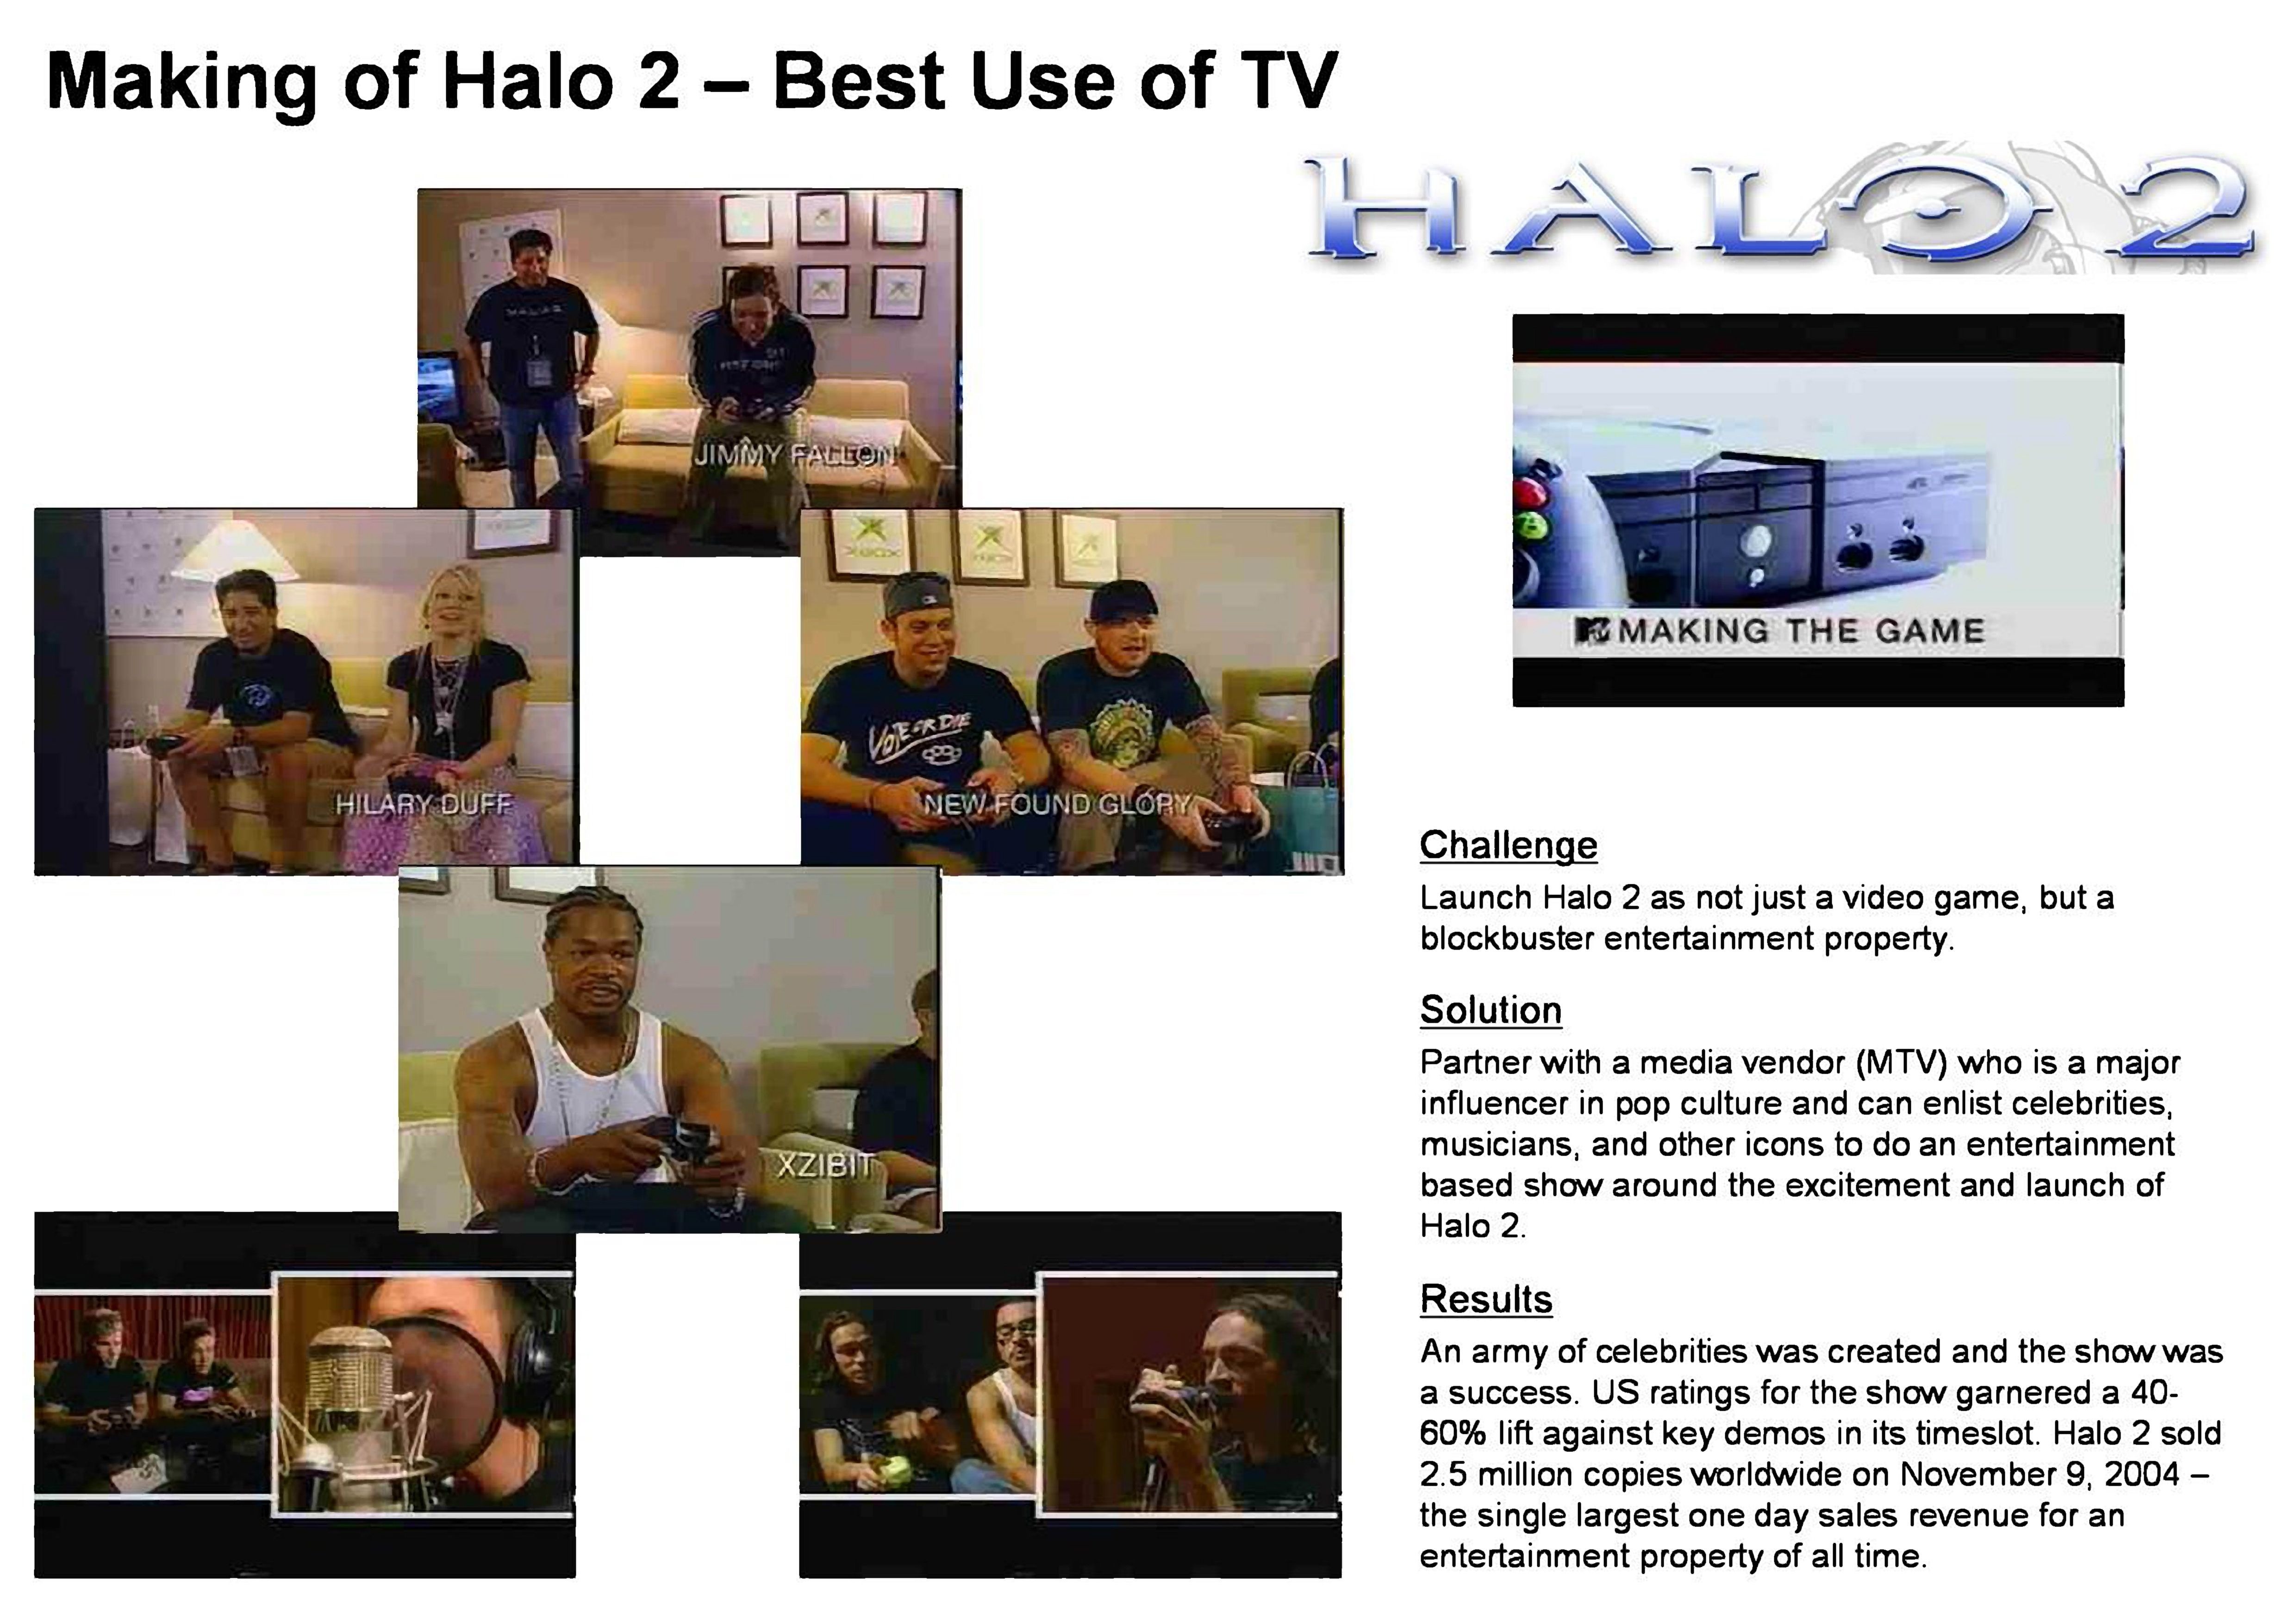 HALO 2 VIDEO GAME